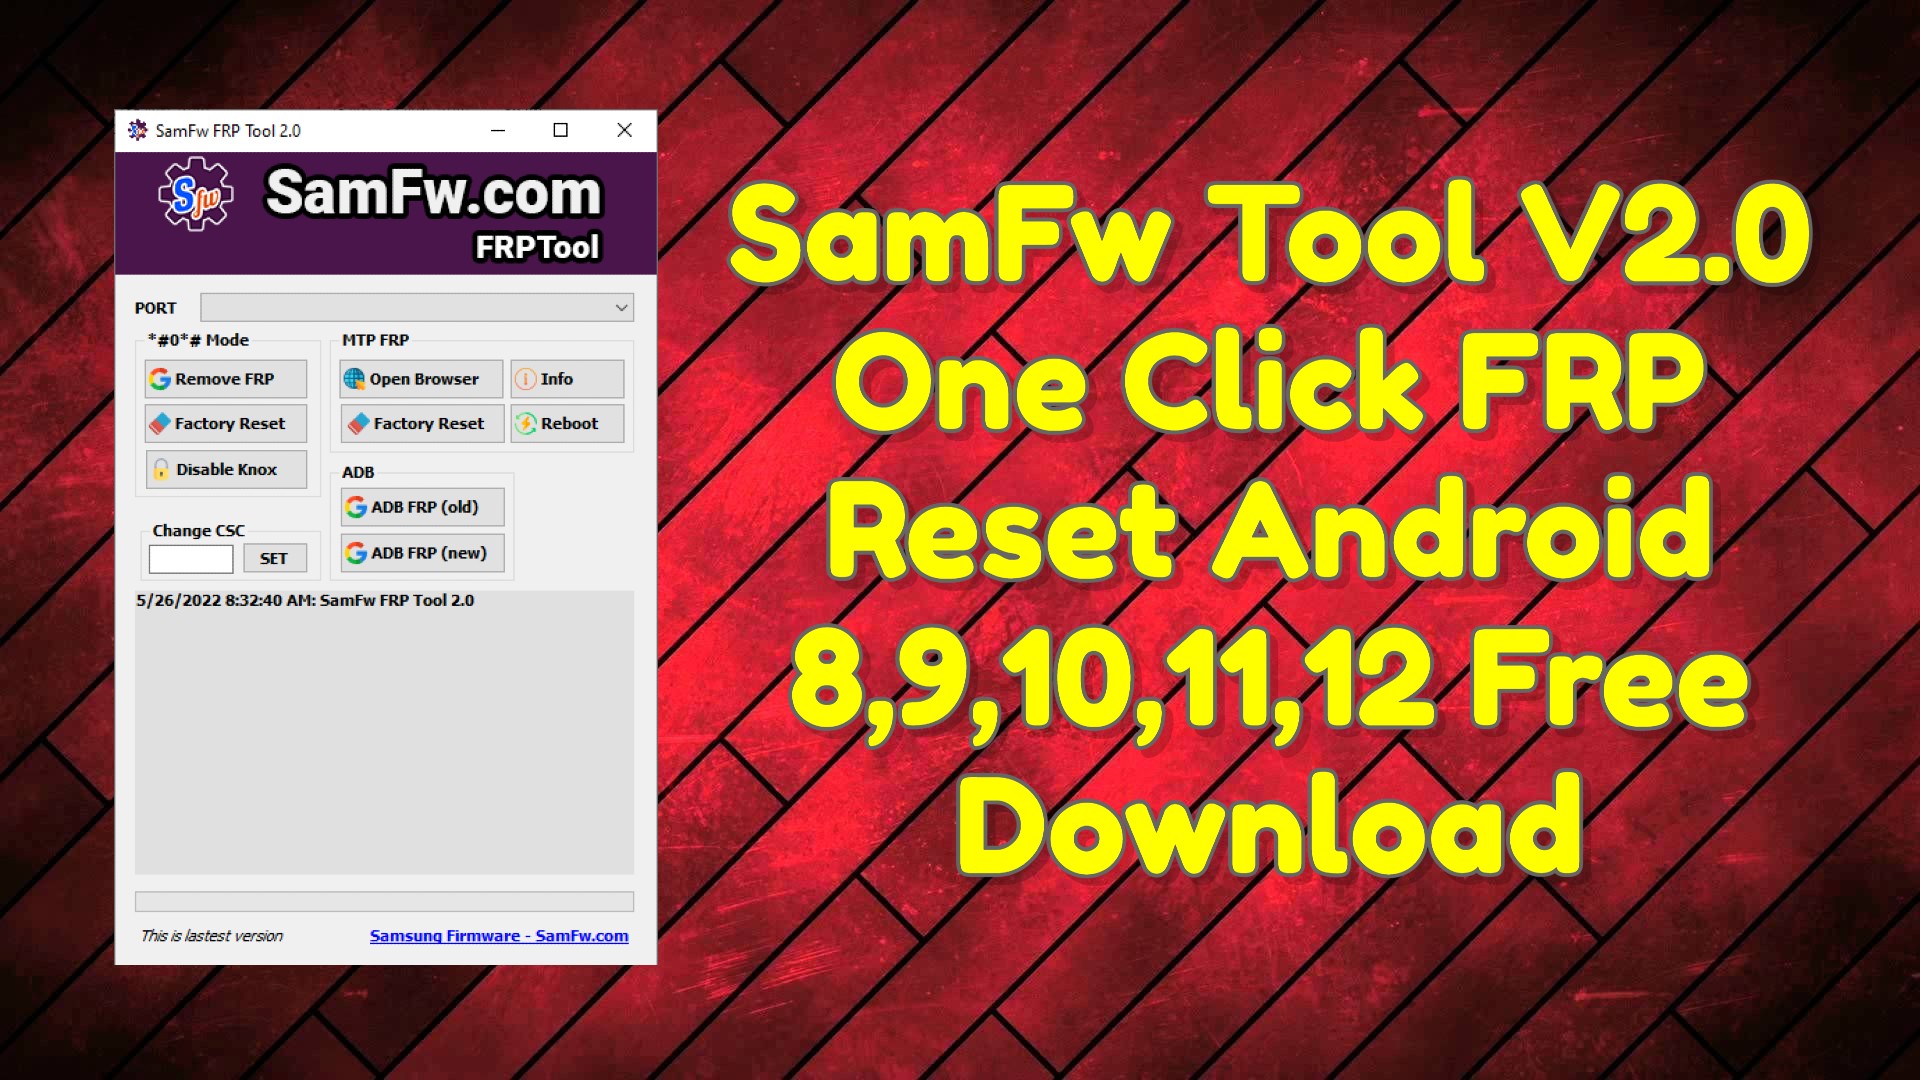 SamFw Tool V2.0 One Click FRP Reset Android 8/9/10/11/12 Free Download